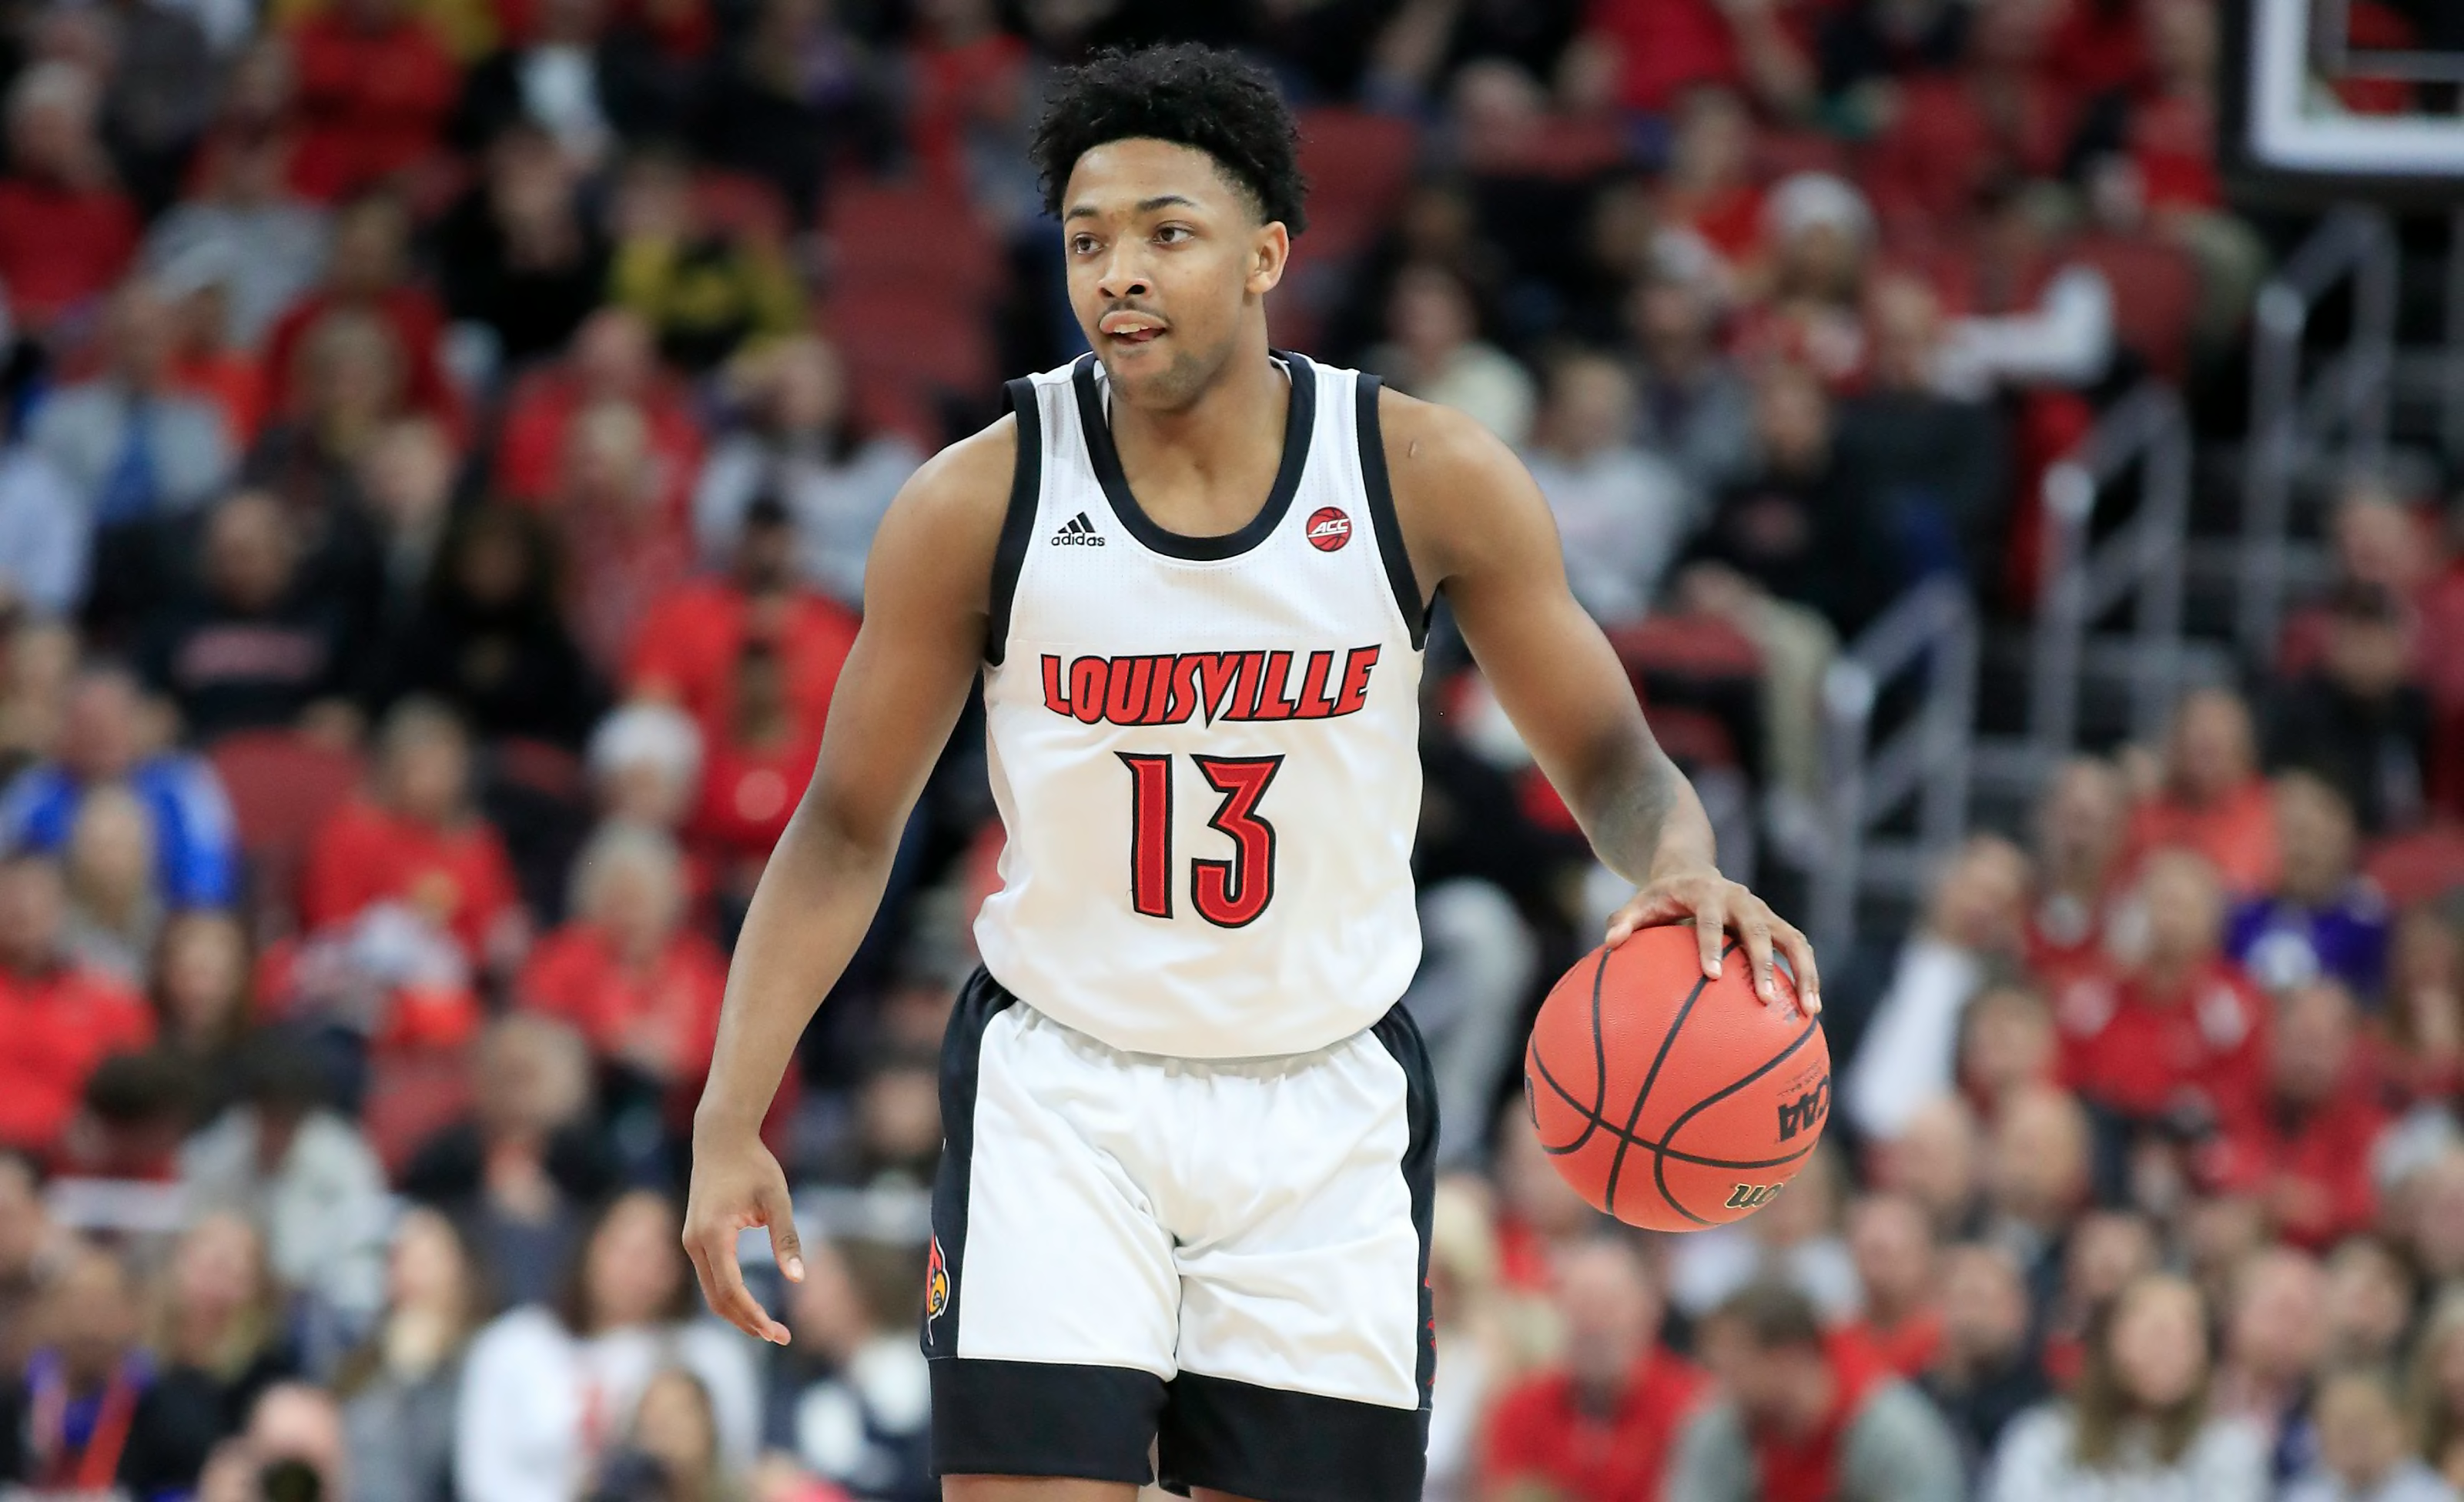 Is Louisville basketball due for a change in the starting lineup? - Page 2